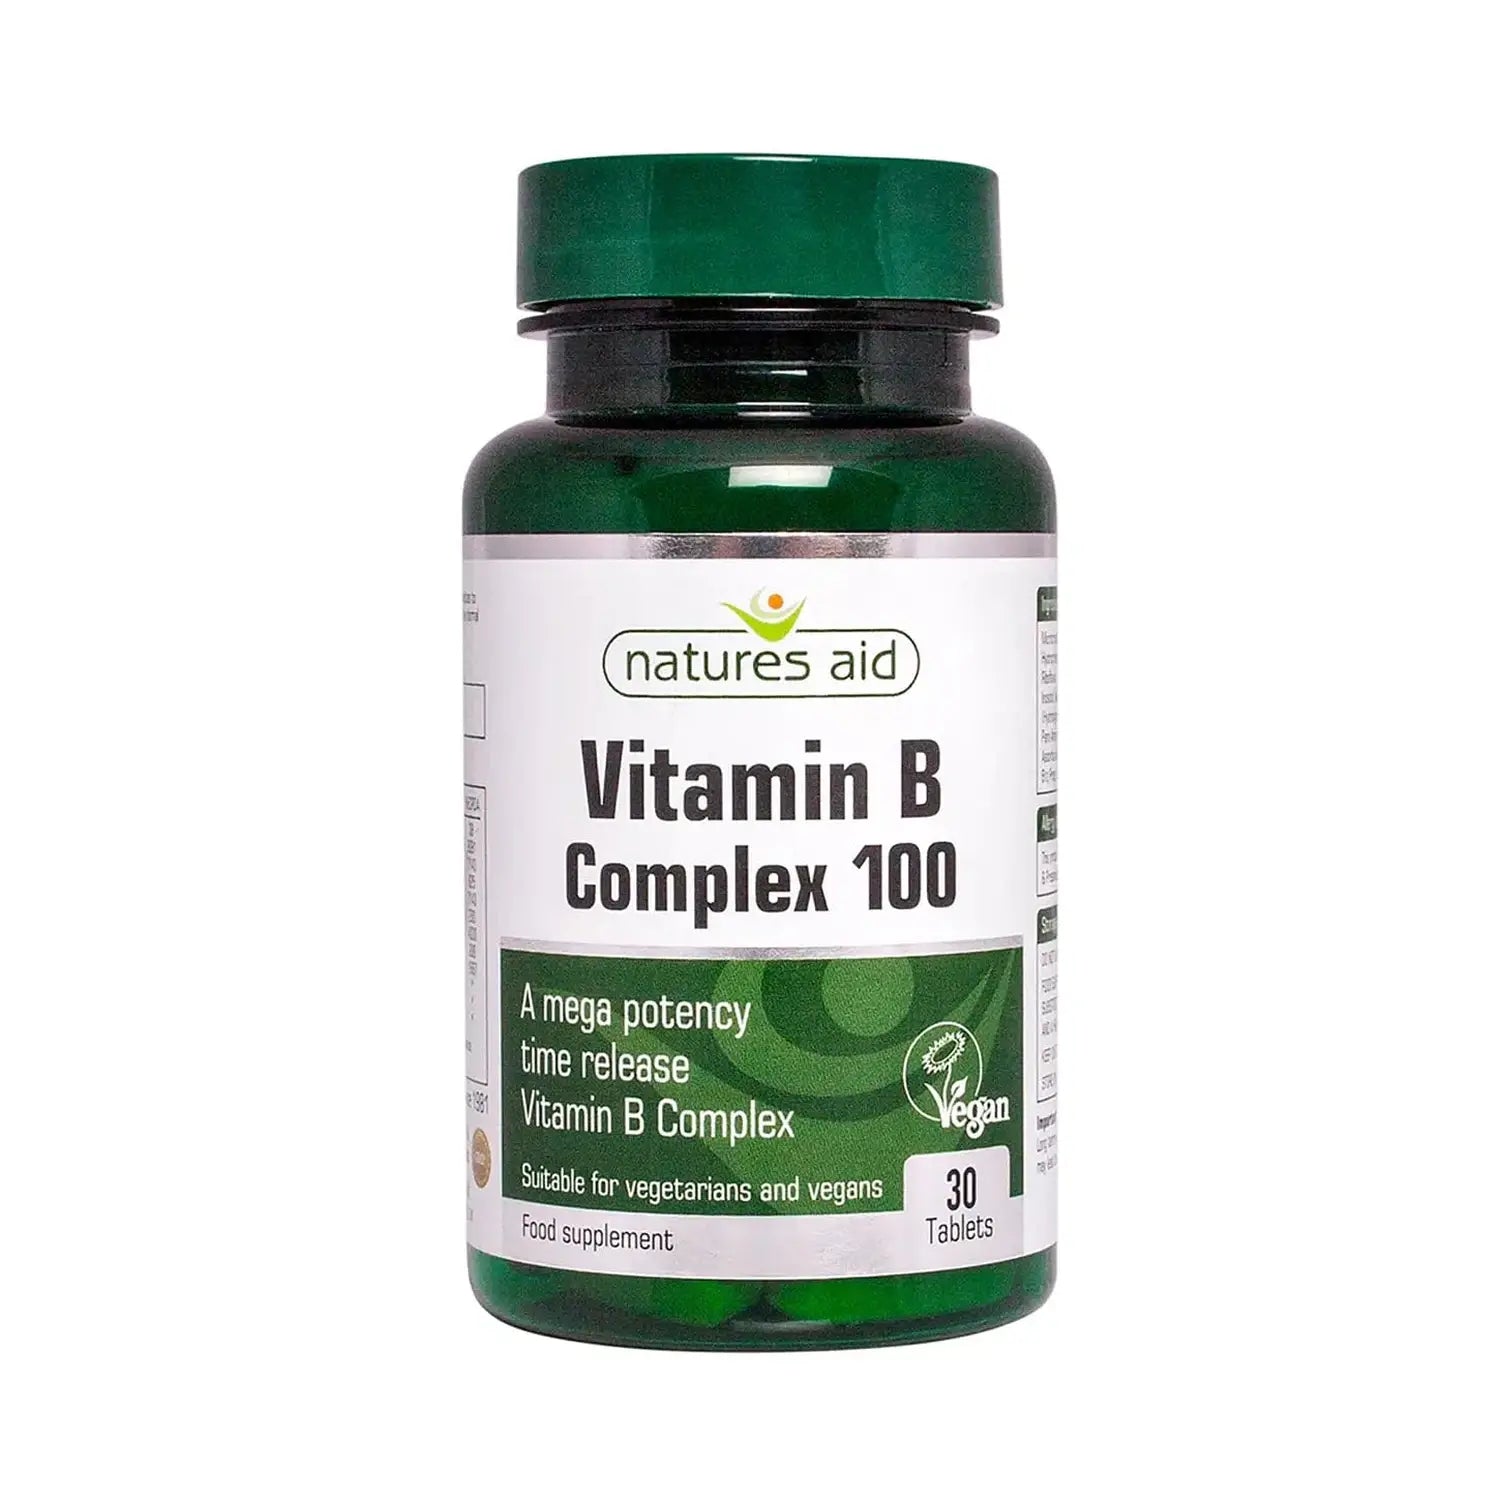 Natures Aid Vit B Complex Time Release (100 mg Mega Formula) 30 Tabs kaufen bei HighPowered.ch